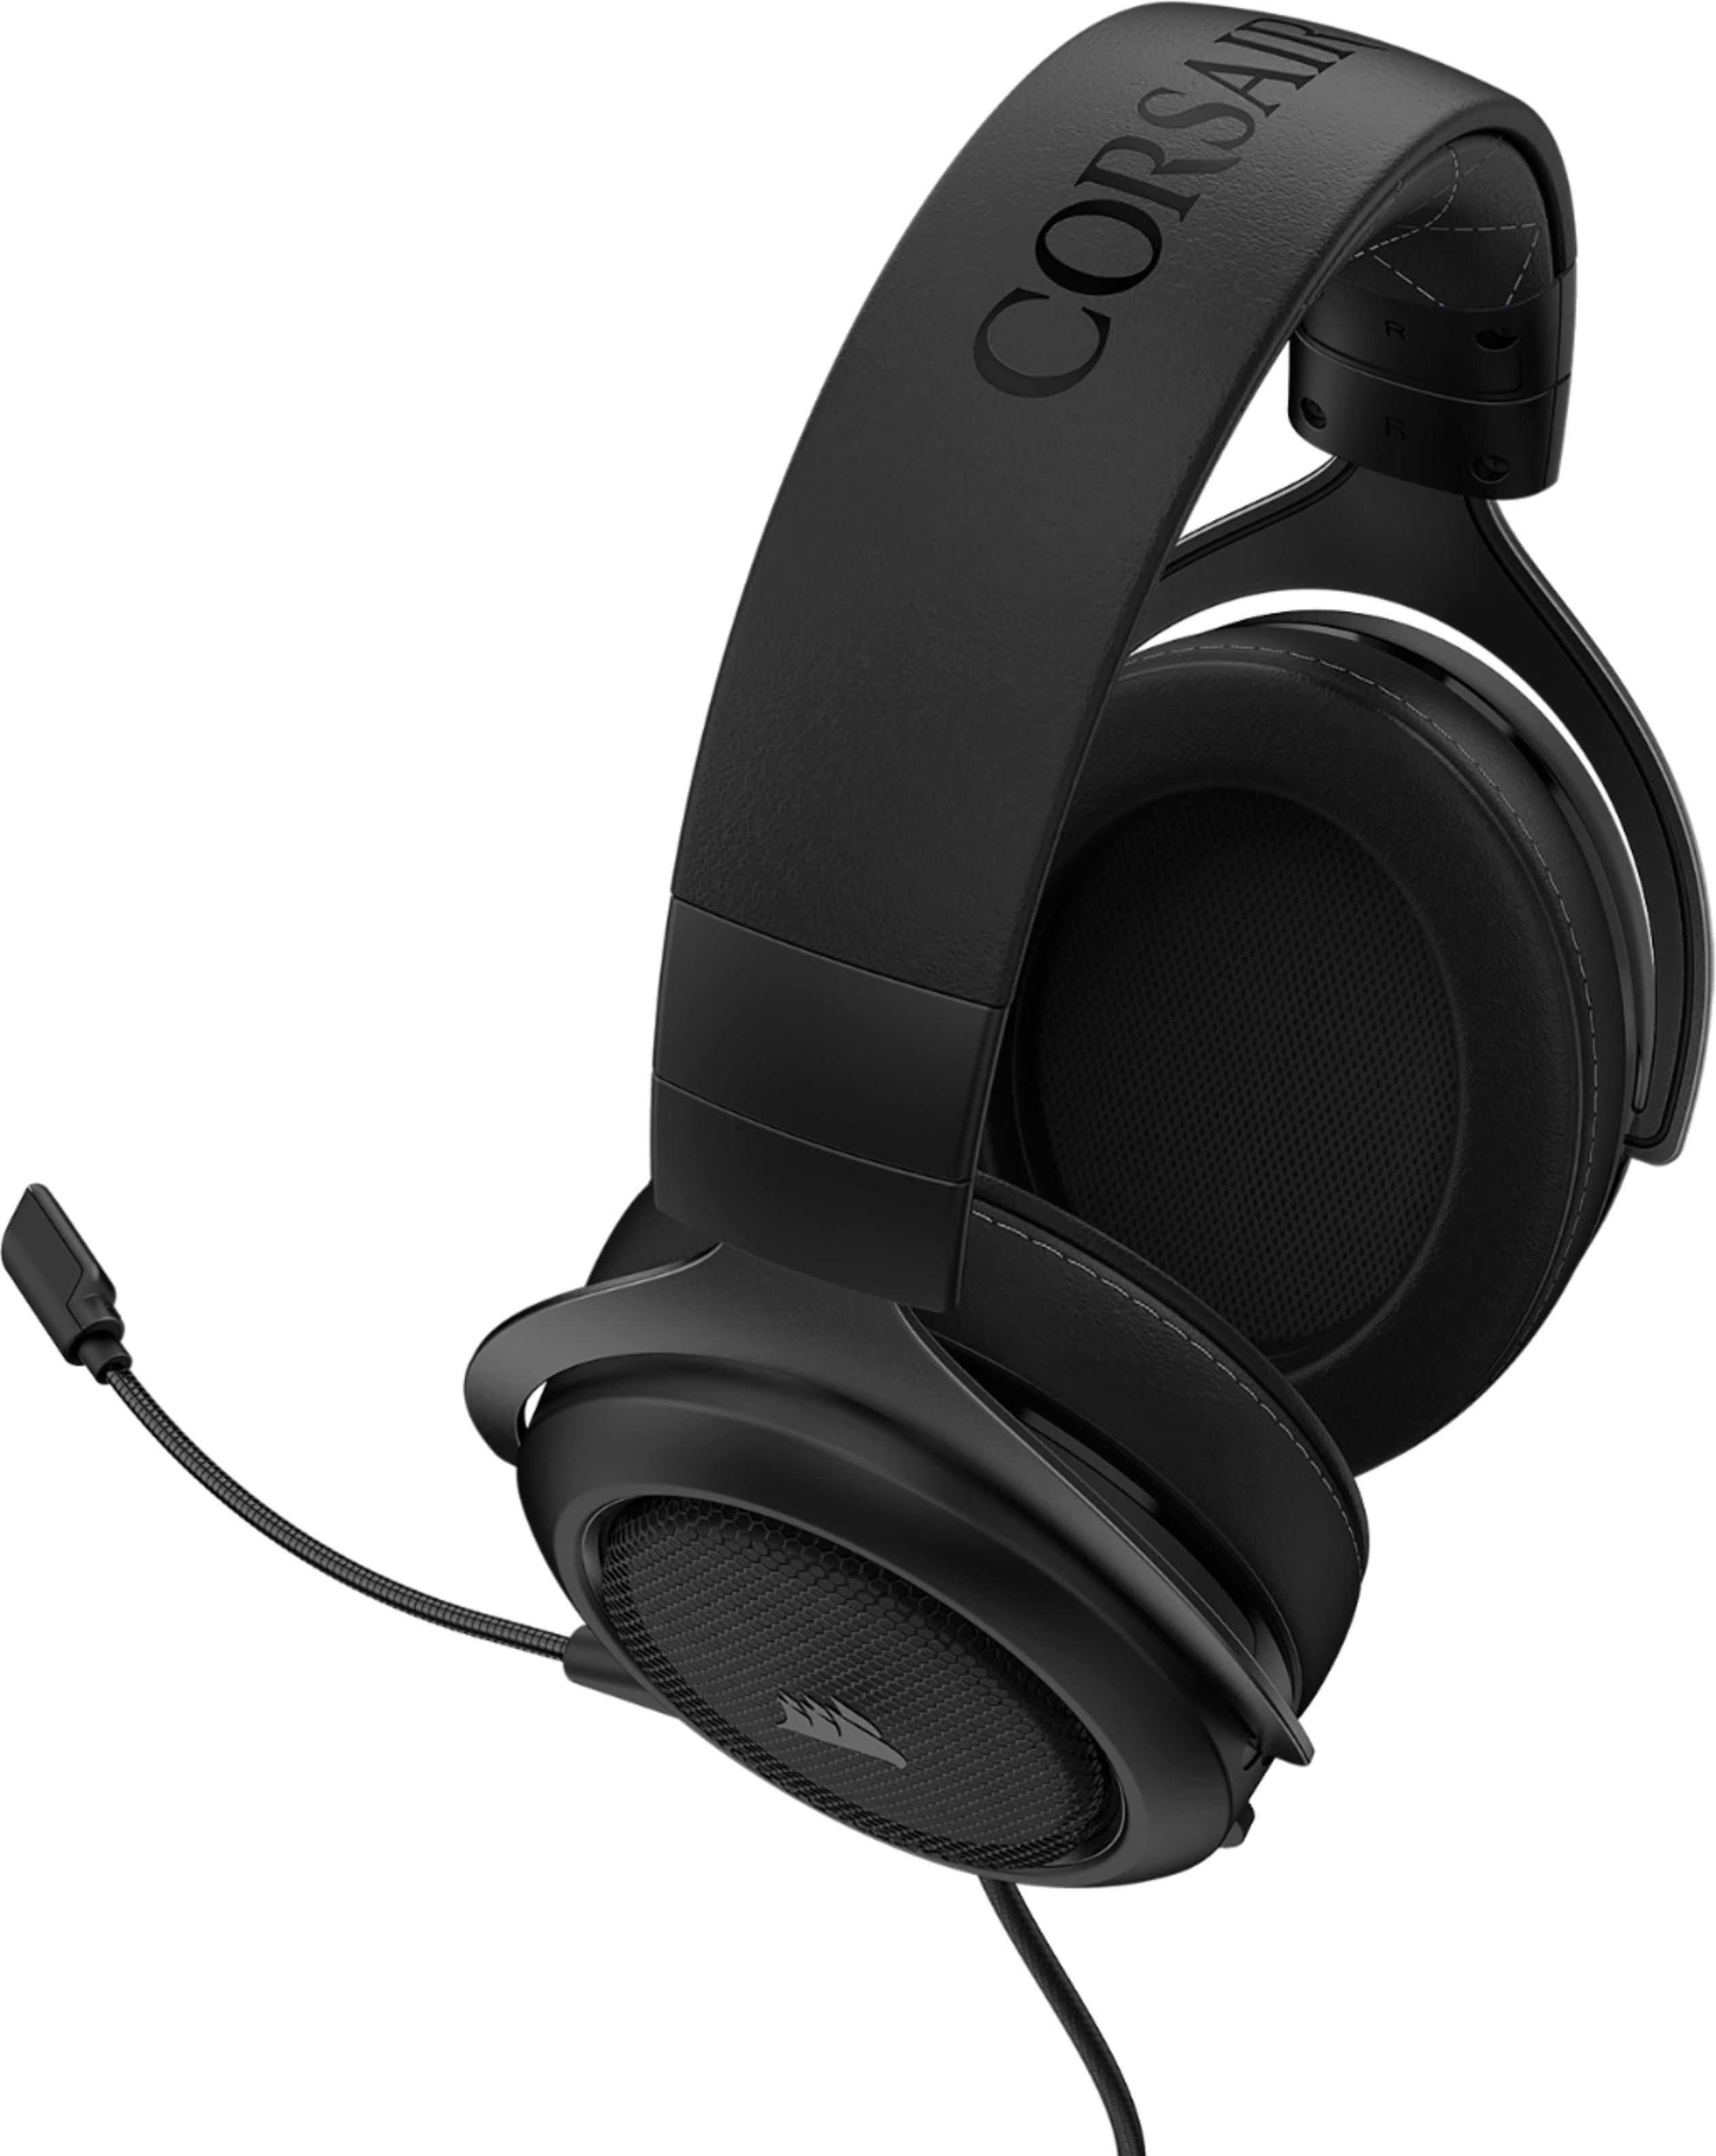 schors schoner Sobriquette Best Buy: CORSAIR HS60 PRO SURROUND Wired Stereo Gaming Headset Carbon  CA-9011213-NA